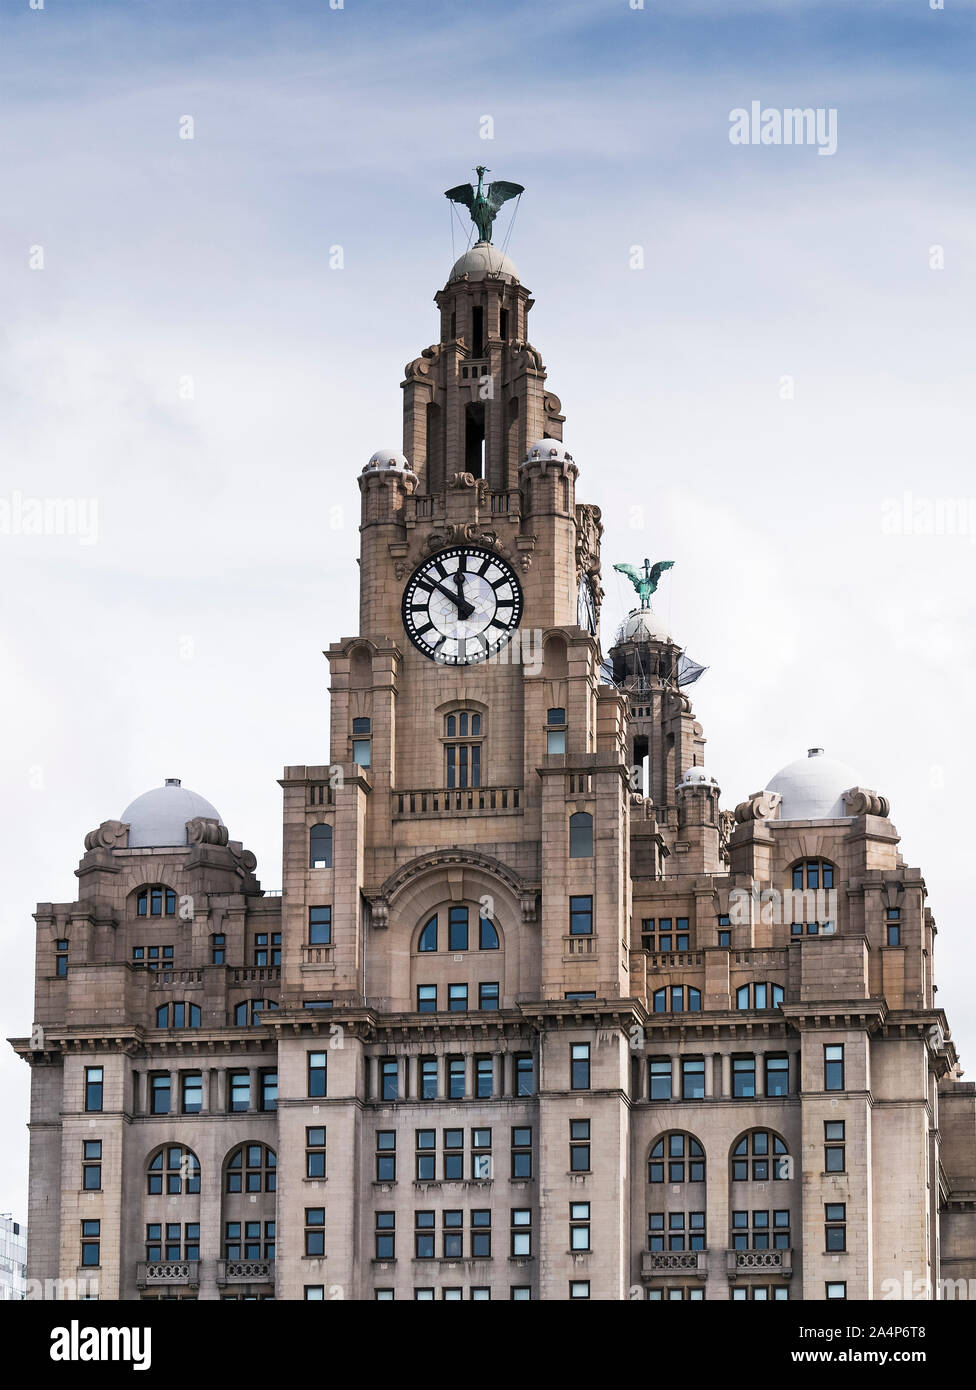 Royal Liver Building, one of The Three Graces, on Liverpool waterfront with Liver Birds, UK Stock Photo